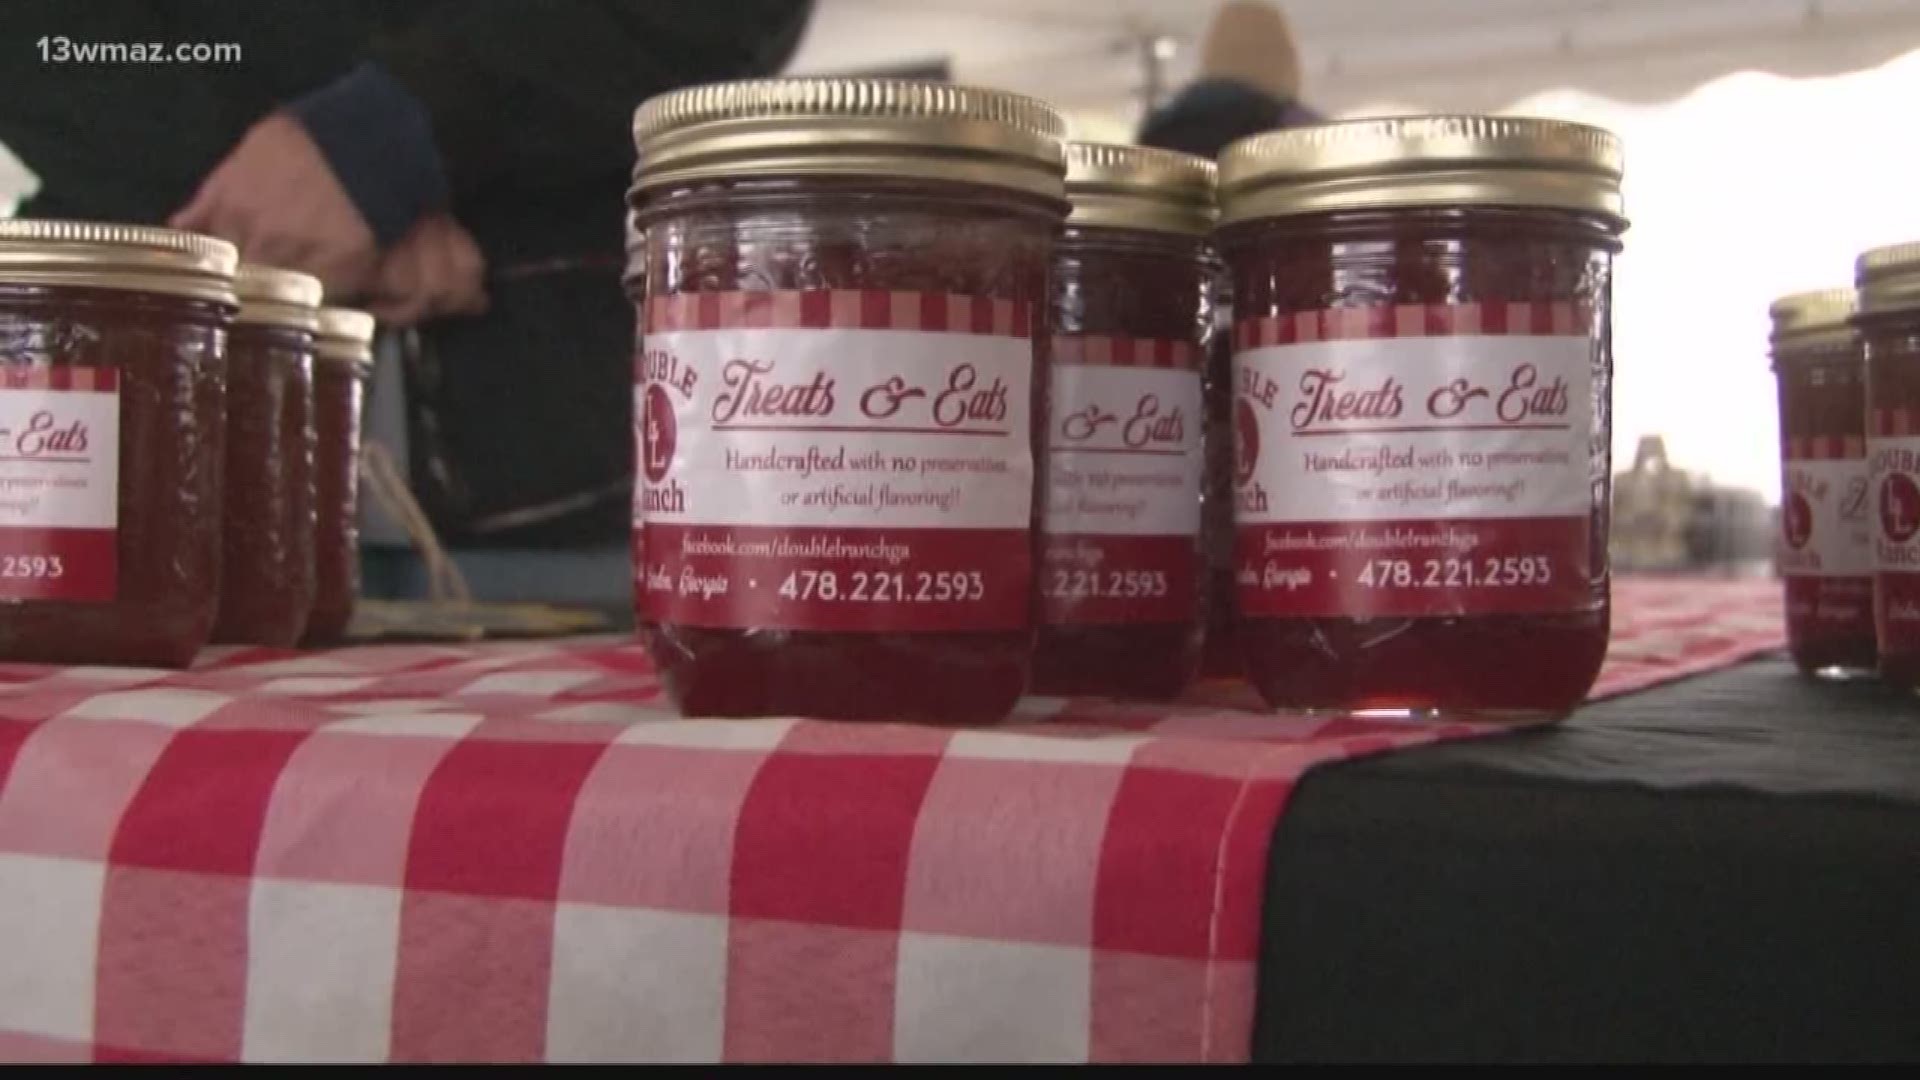 Georgia Grown Market gives back locally